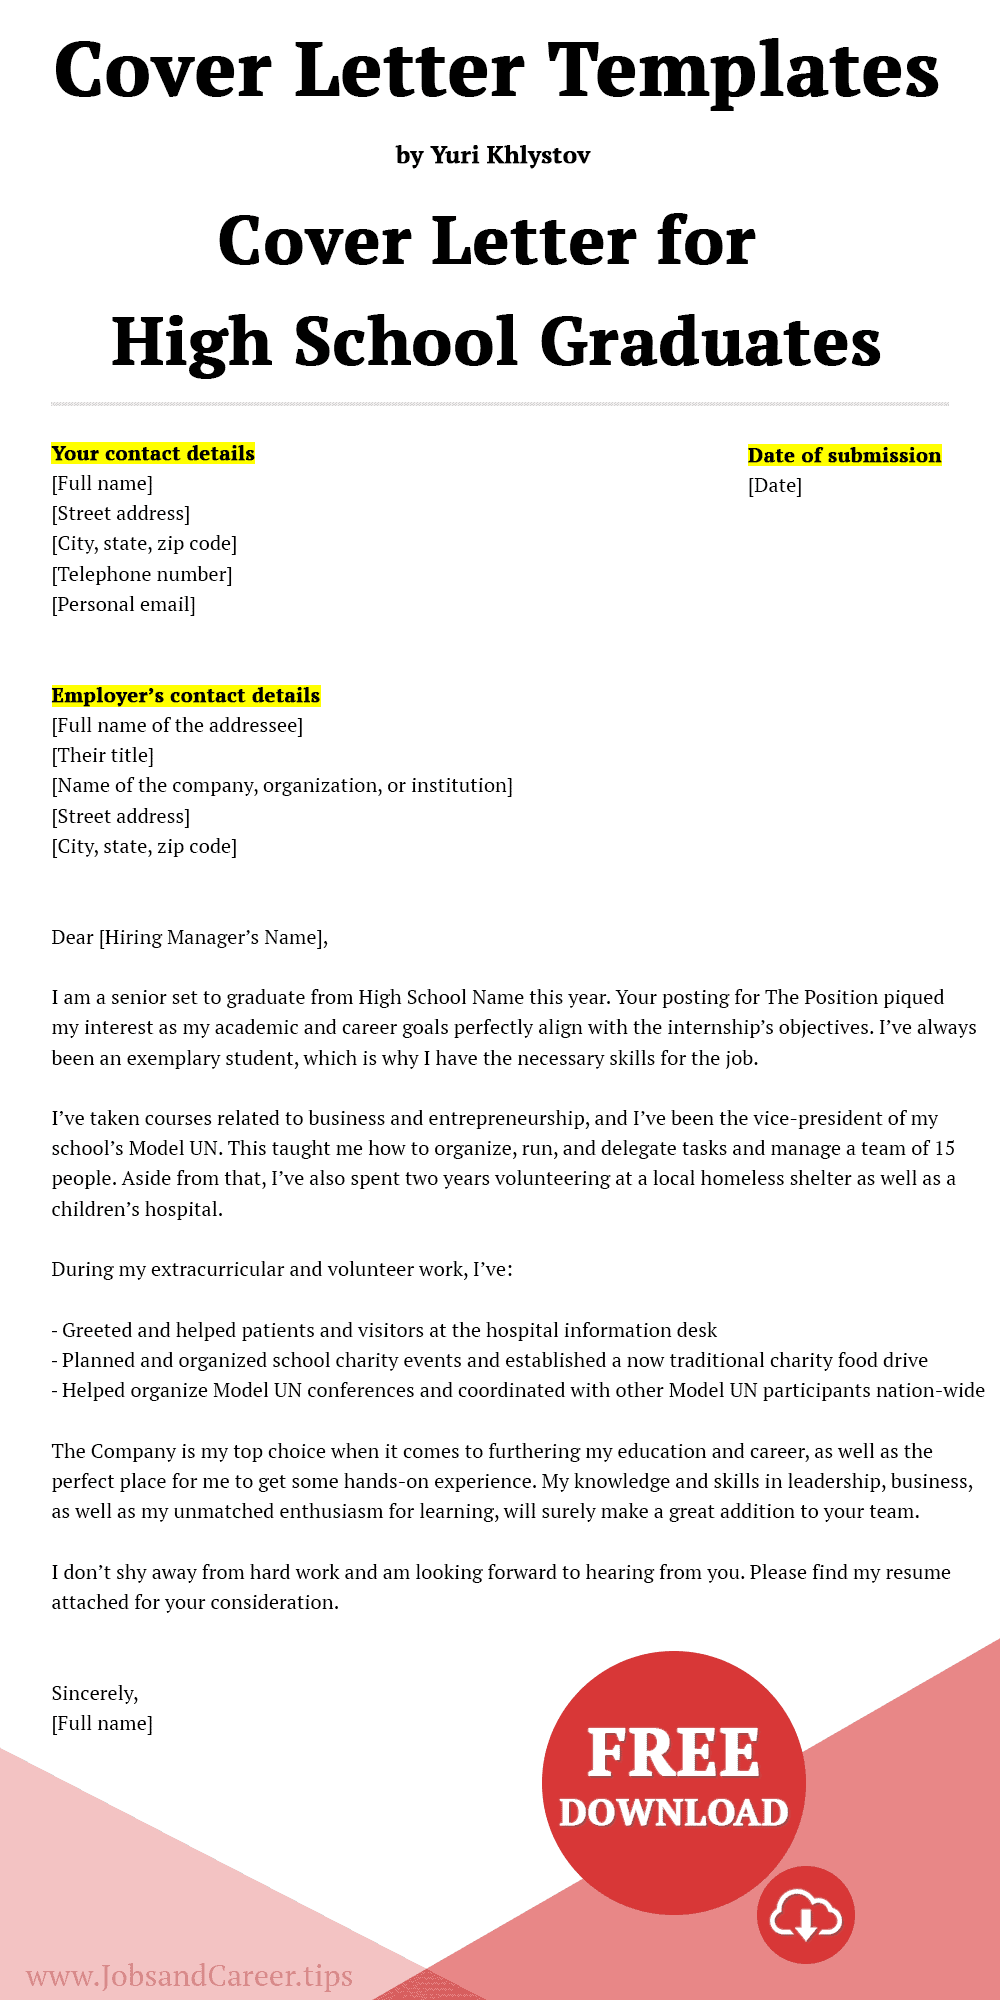 cover letter of a high school graduate